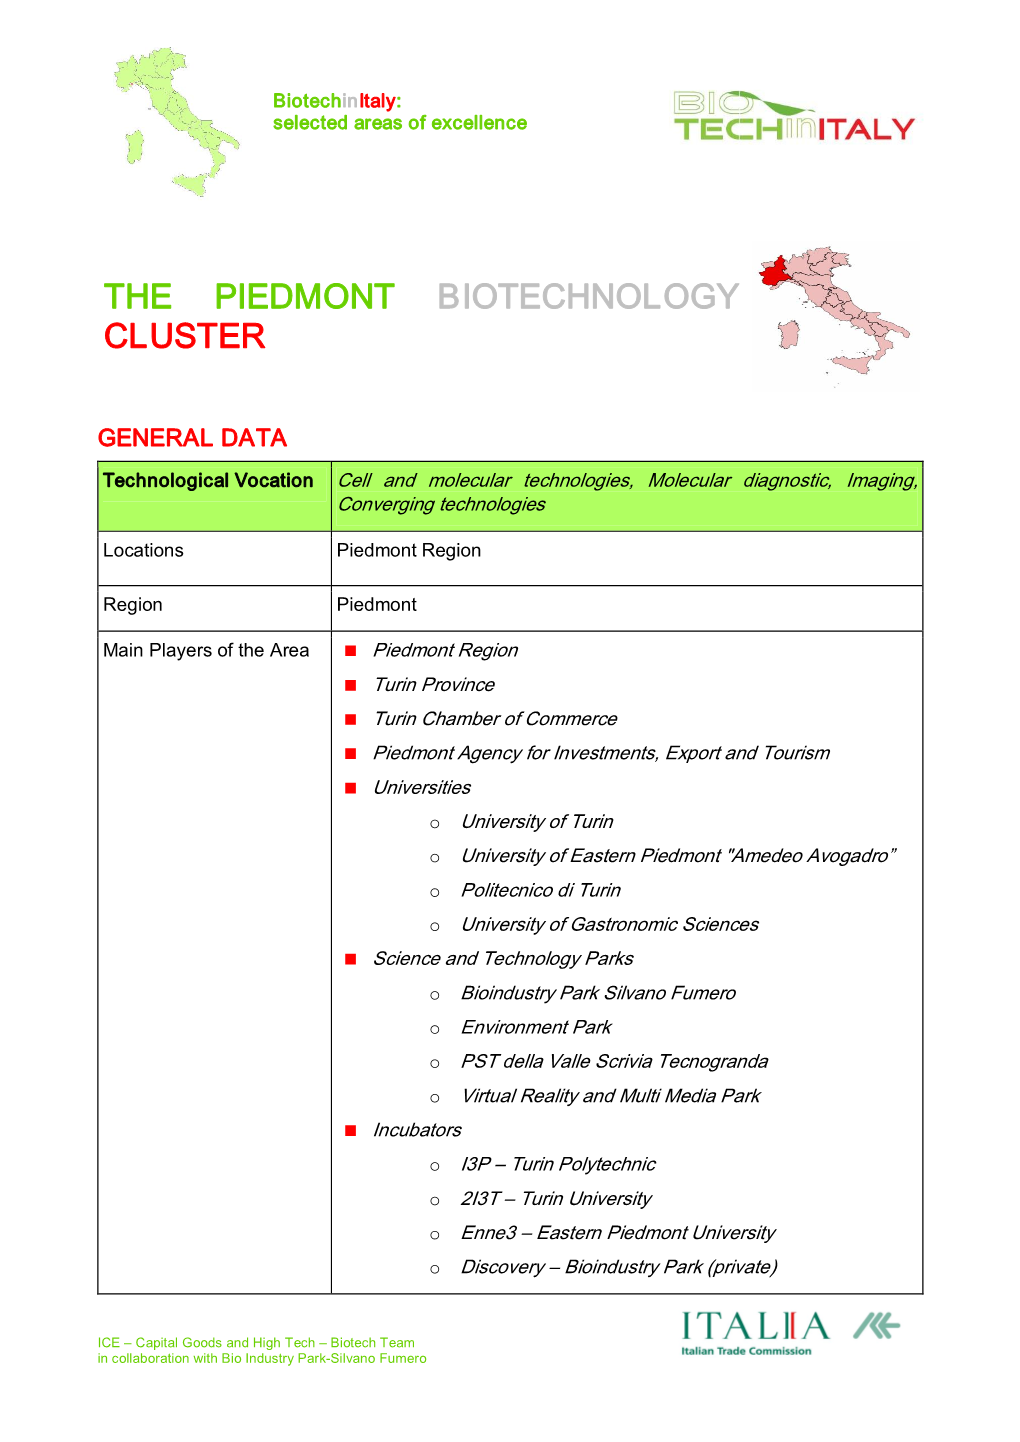 The Piedmont Biotechnology Cluster